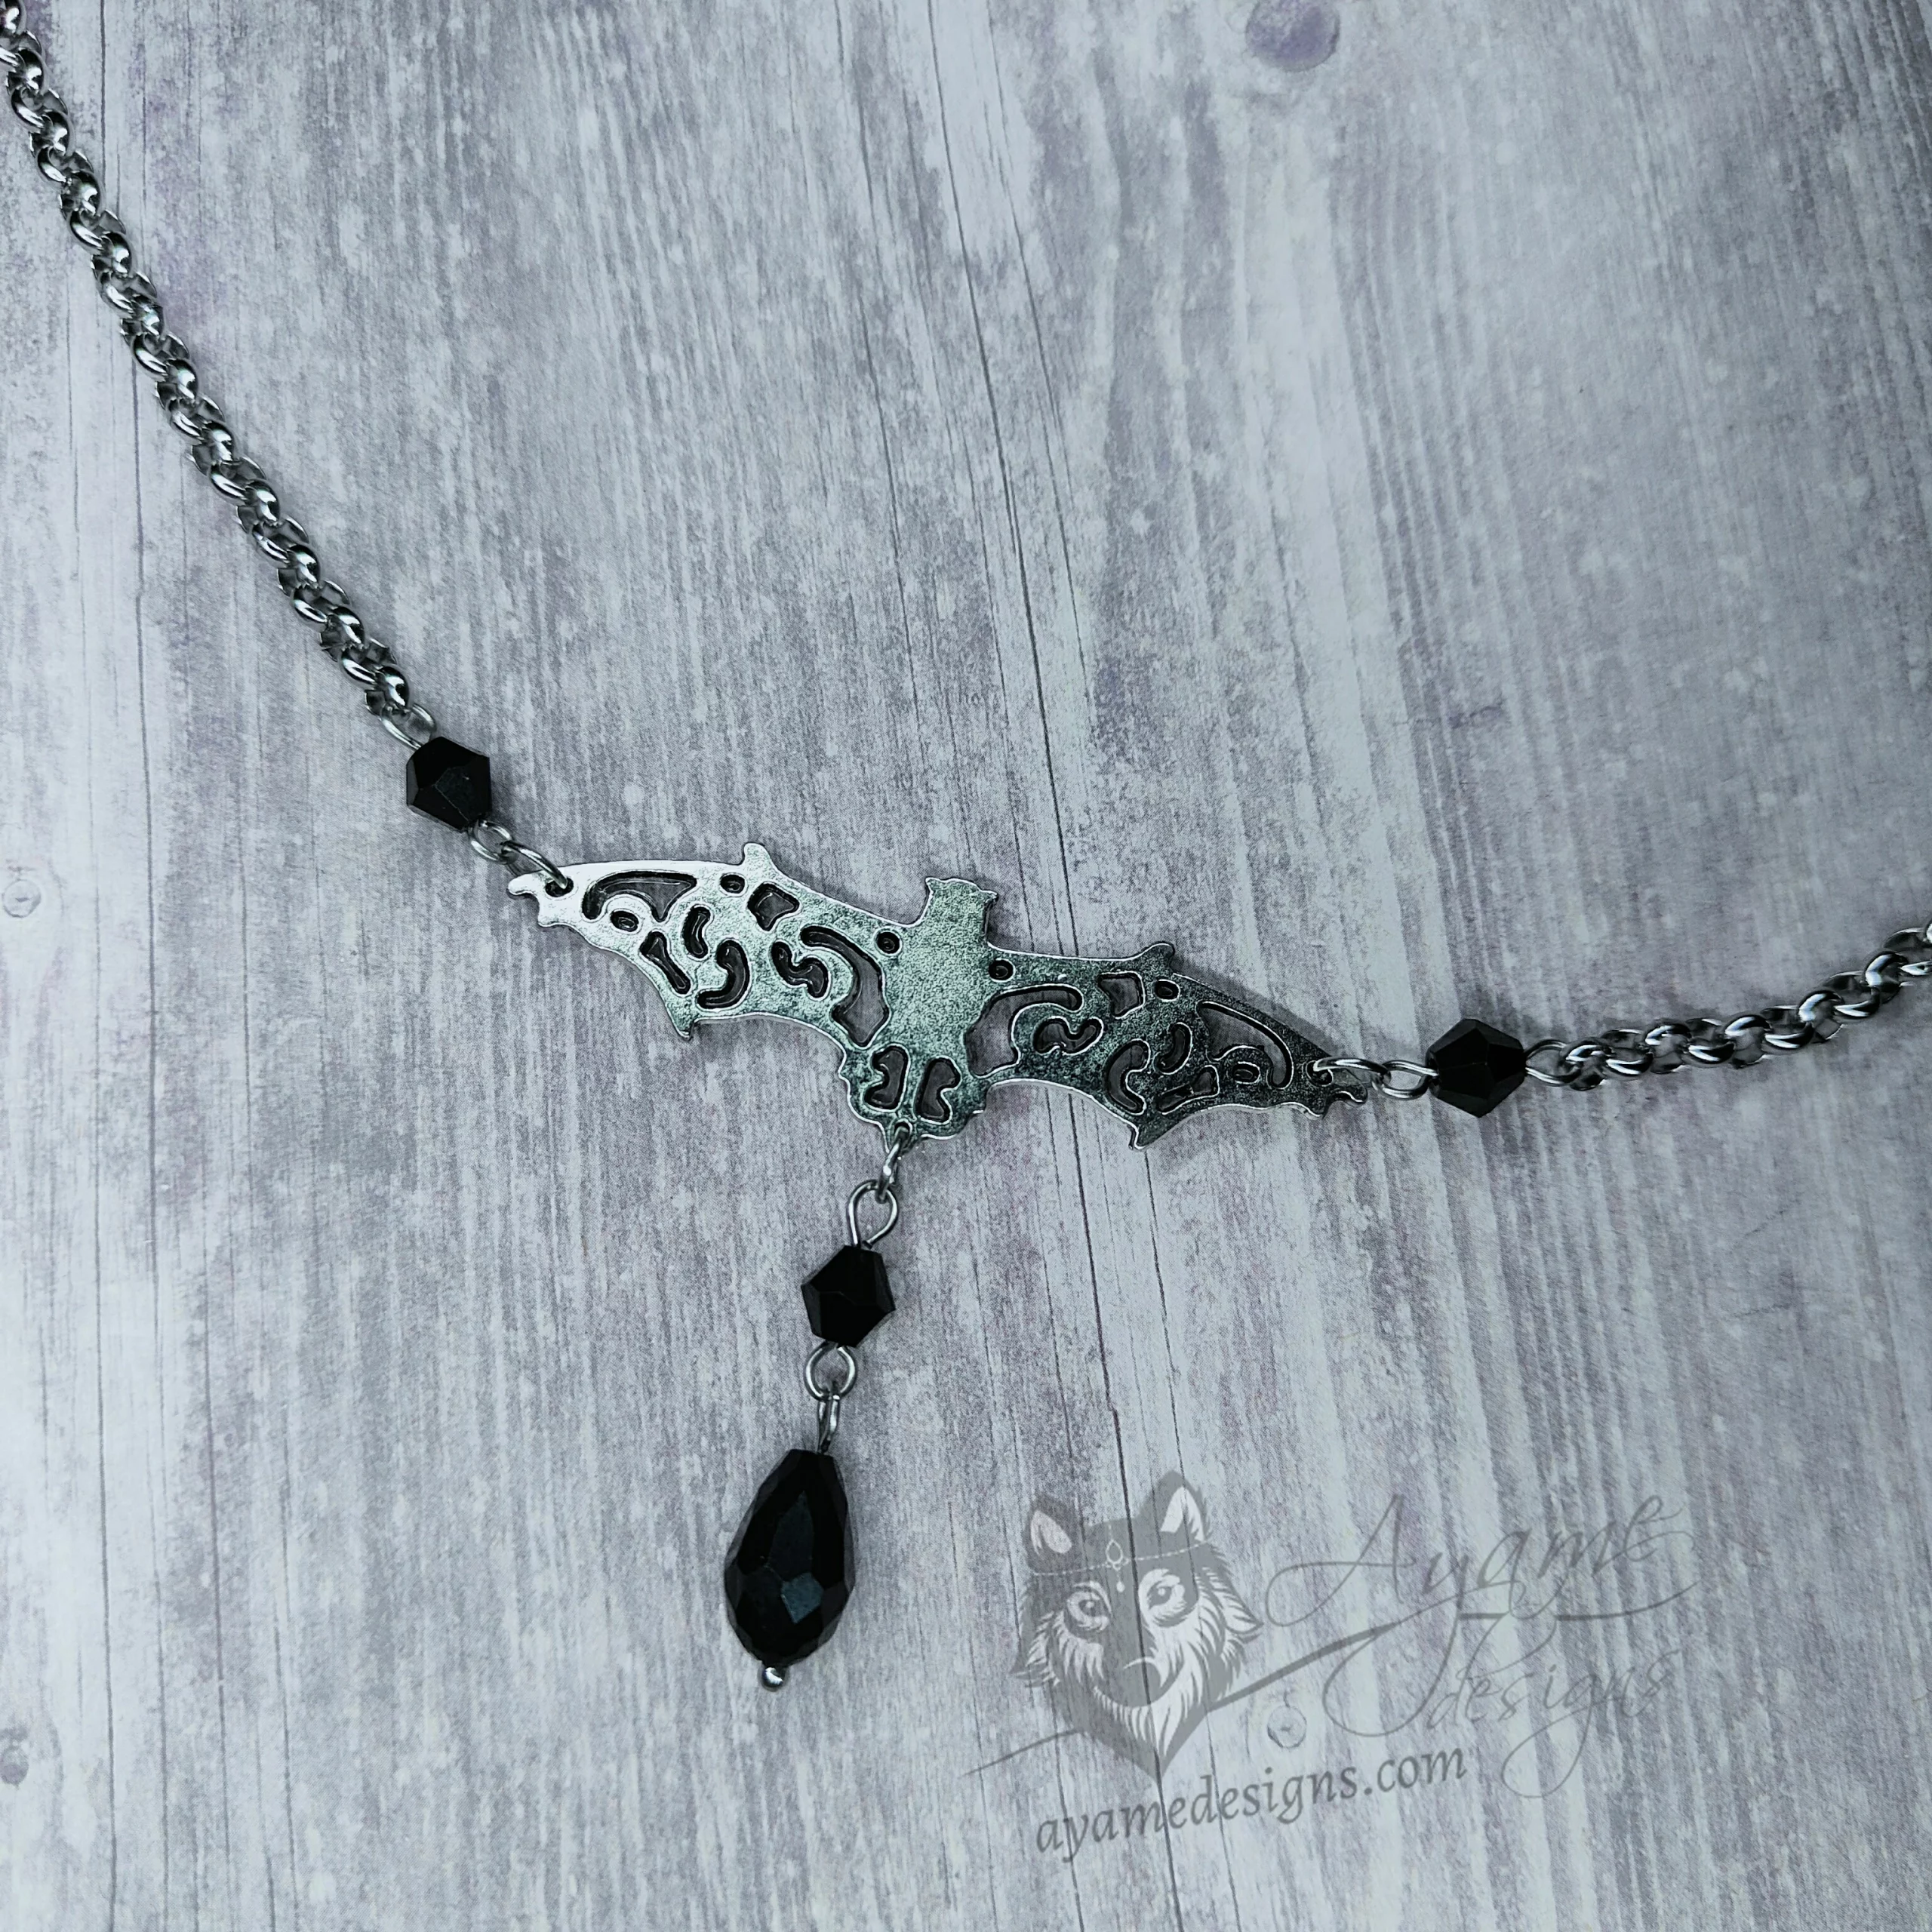 Handmade fantasy head chain with a filigree bat, black Austrian crystal beads and stainless steel chain